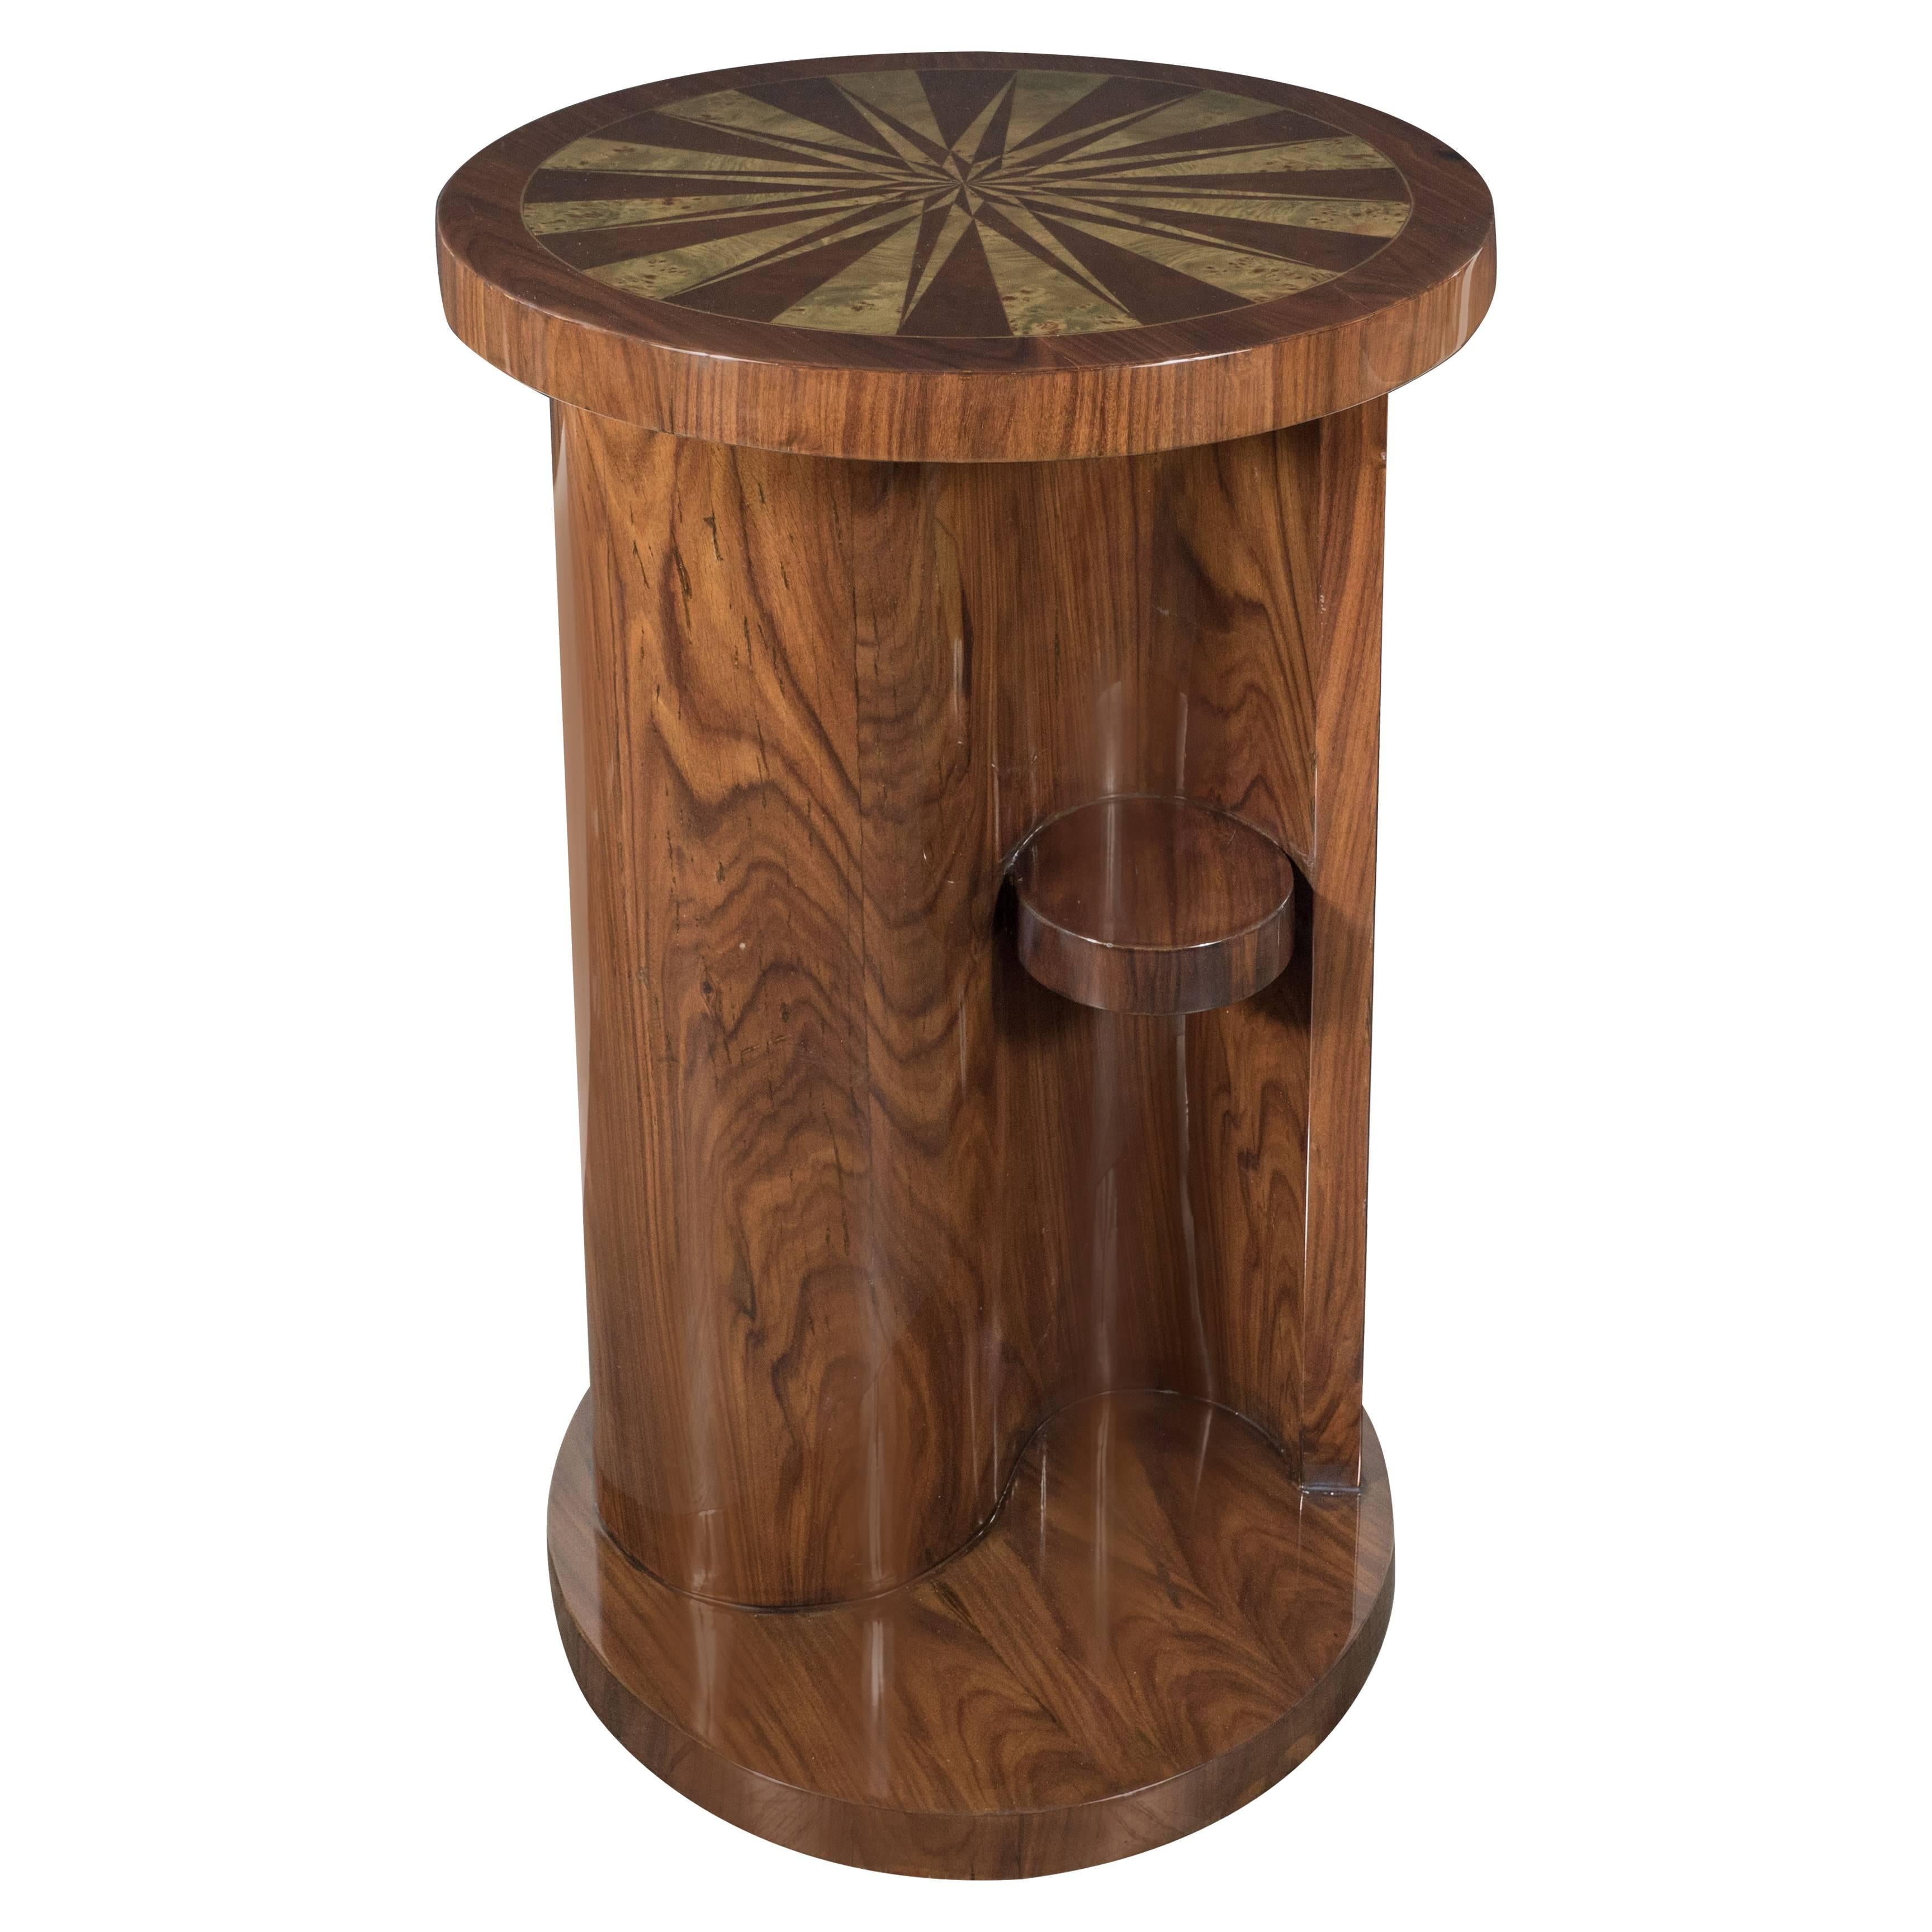 Art Deco Inlaid Starburst Occasional Table in Bookmatched Burled Walnut & Elm